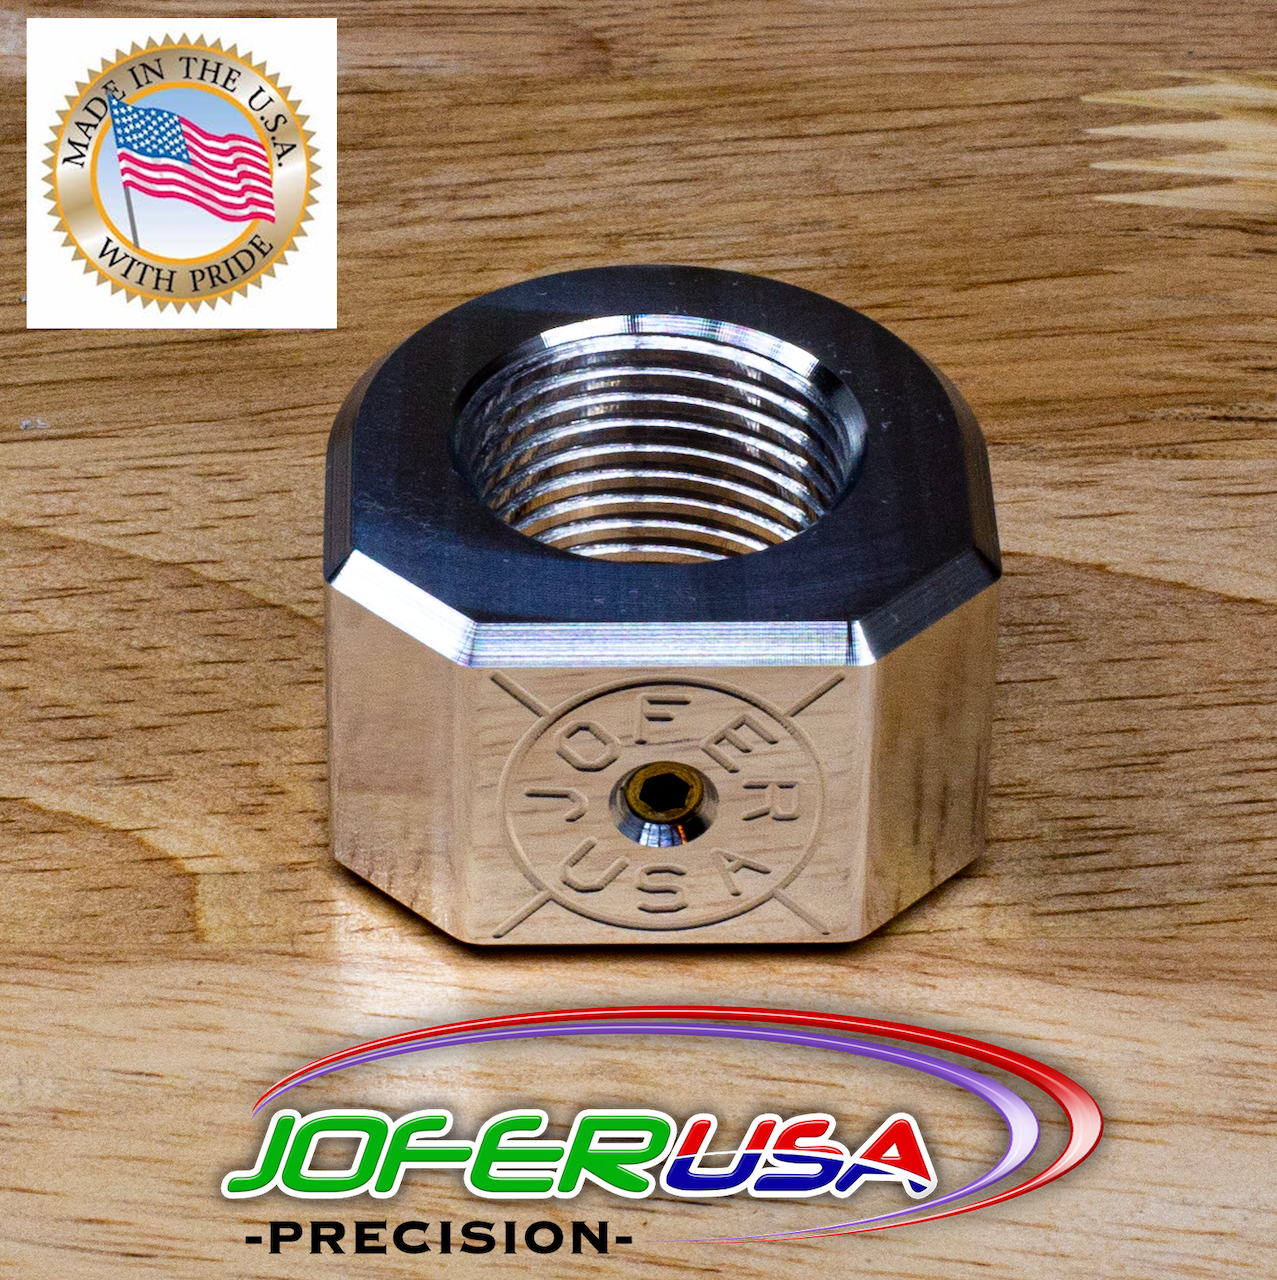 Frankford Style M Press Coaxial Die Block Billet Aluminum CNC Made in USA